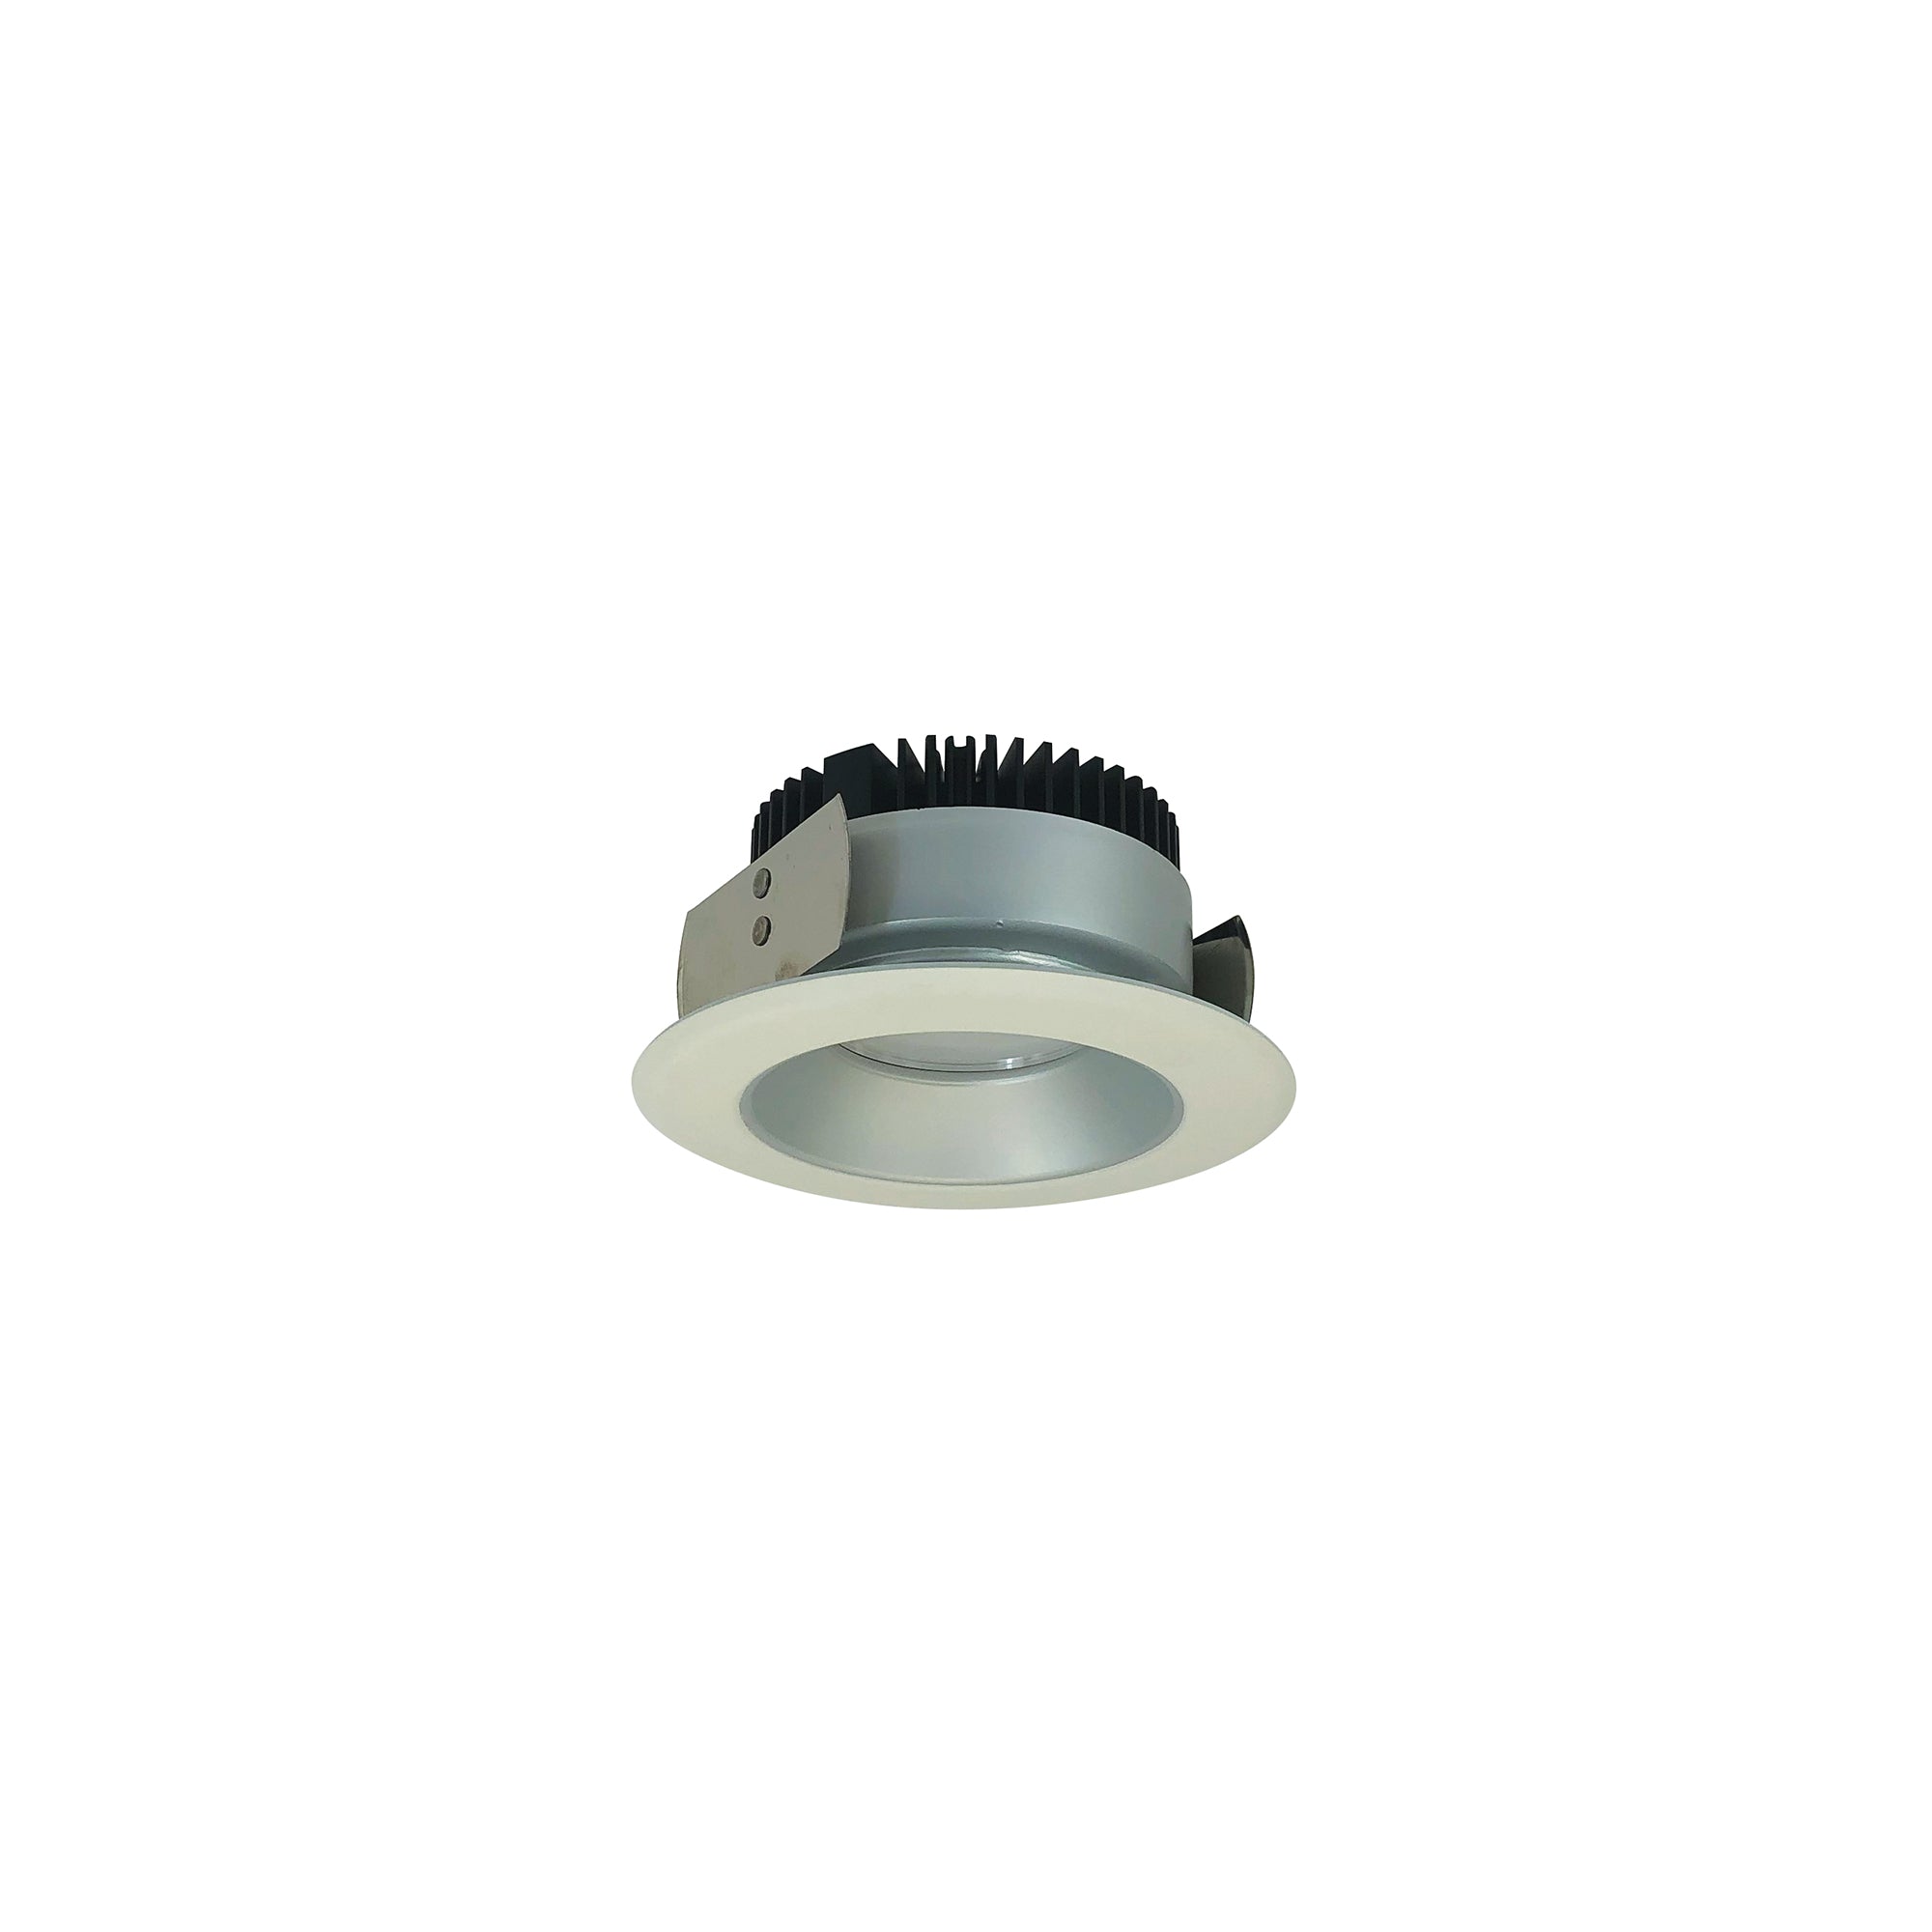 Nora Lighting NRM2-411L0935FHZW - Recessed - 4 Inch Marquise II Round Reflector, 900lm, 3500K, Flood, Haze/White